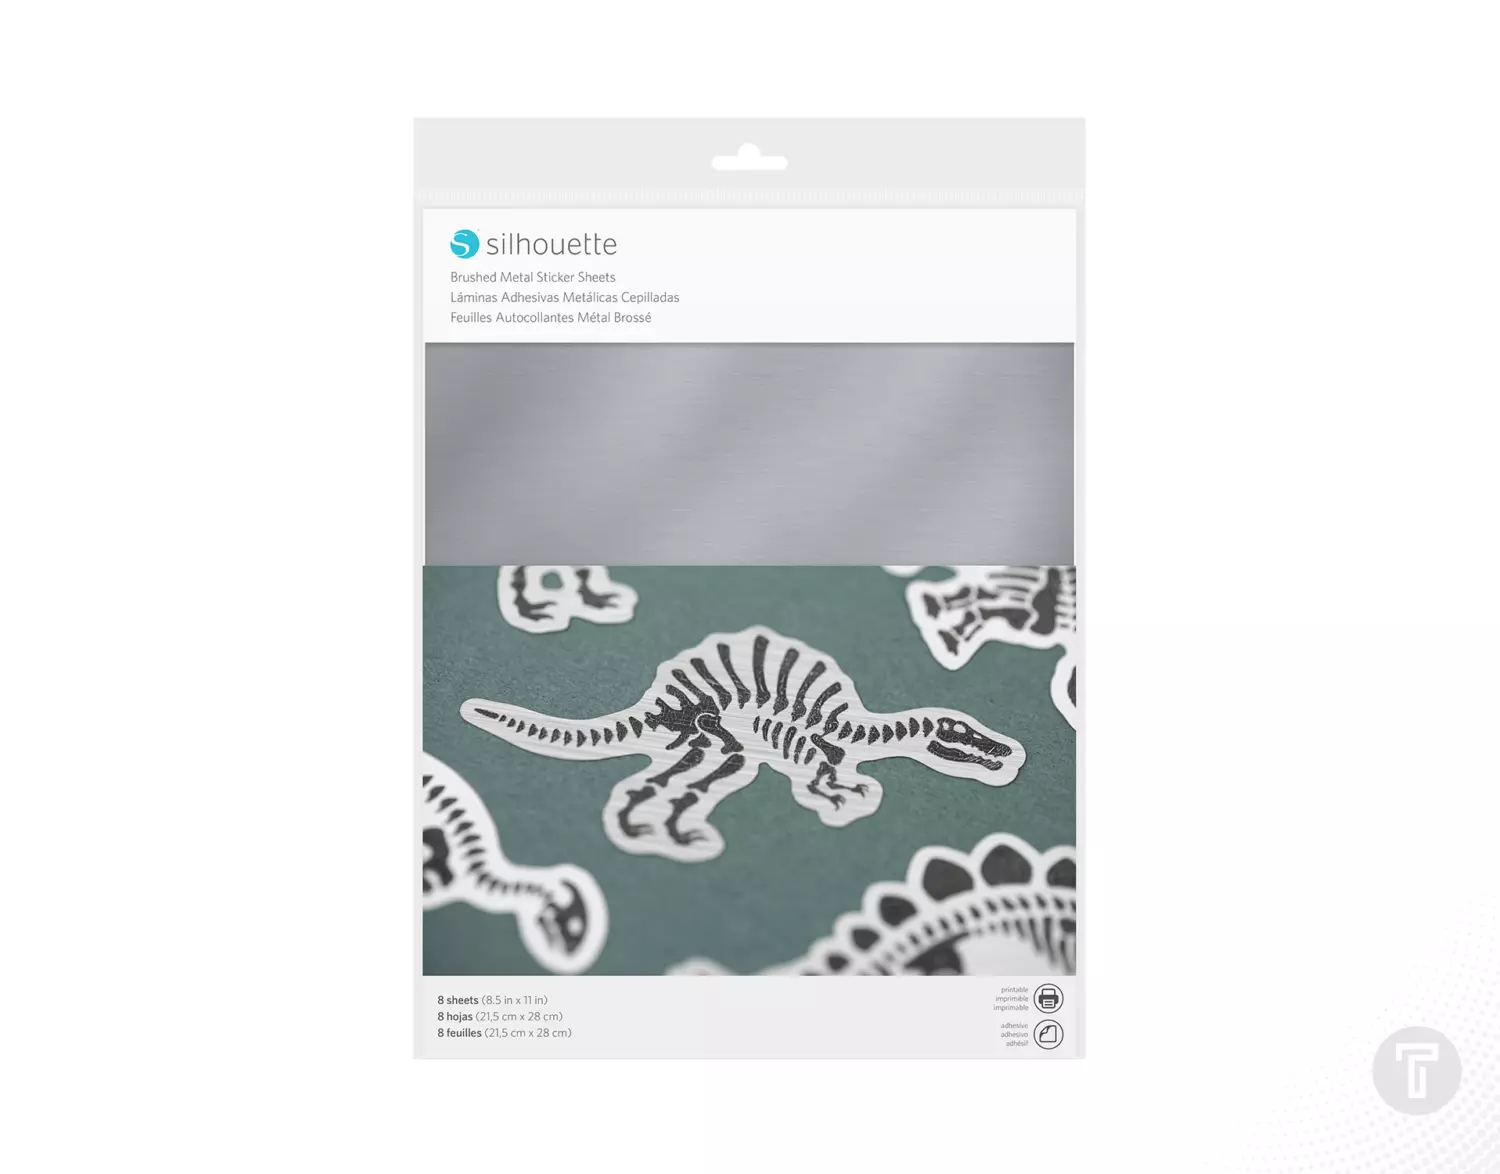 Silhouette brushed metal stickers sheets